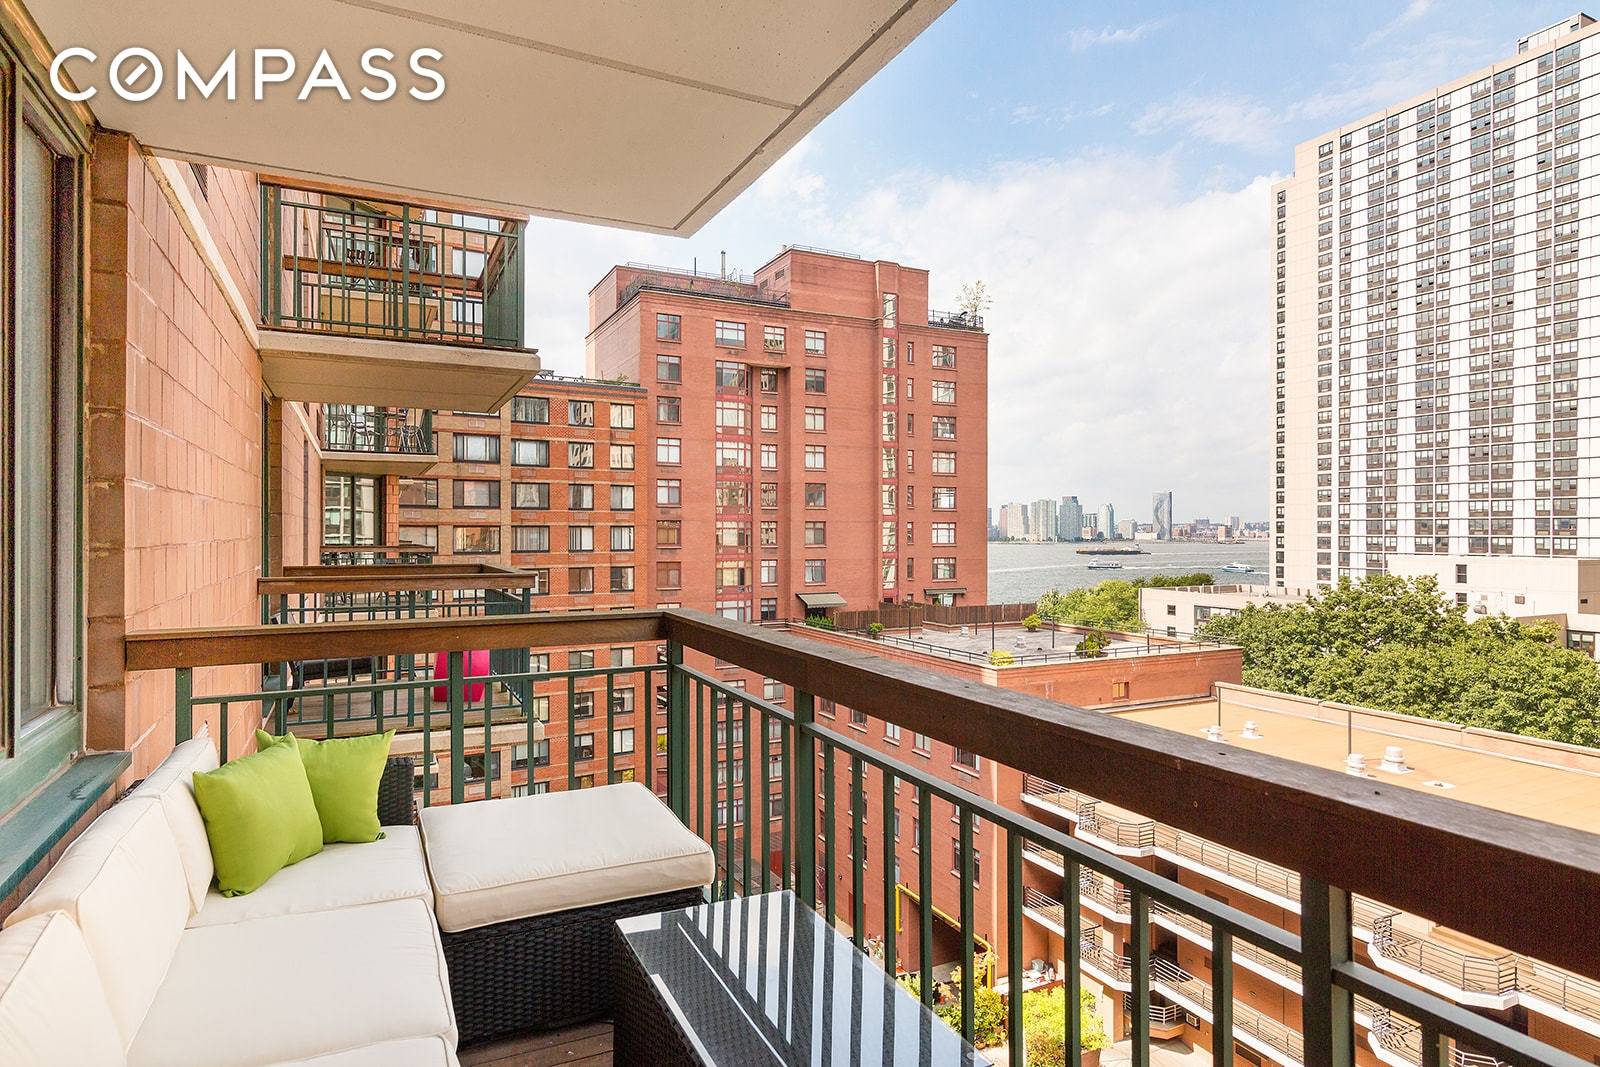 Located at 1 Rector Park 333 Rector Place, is this spacious 768 sq ft one bedroom with its own terrace.